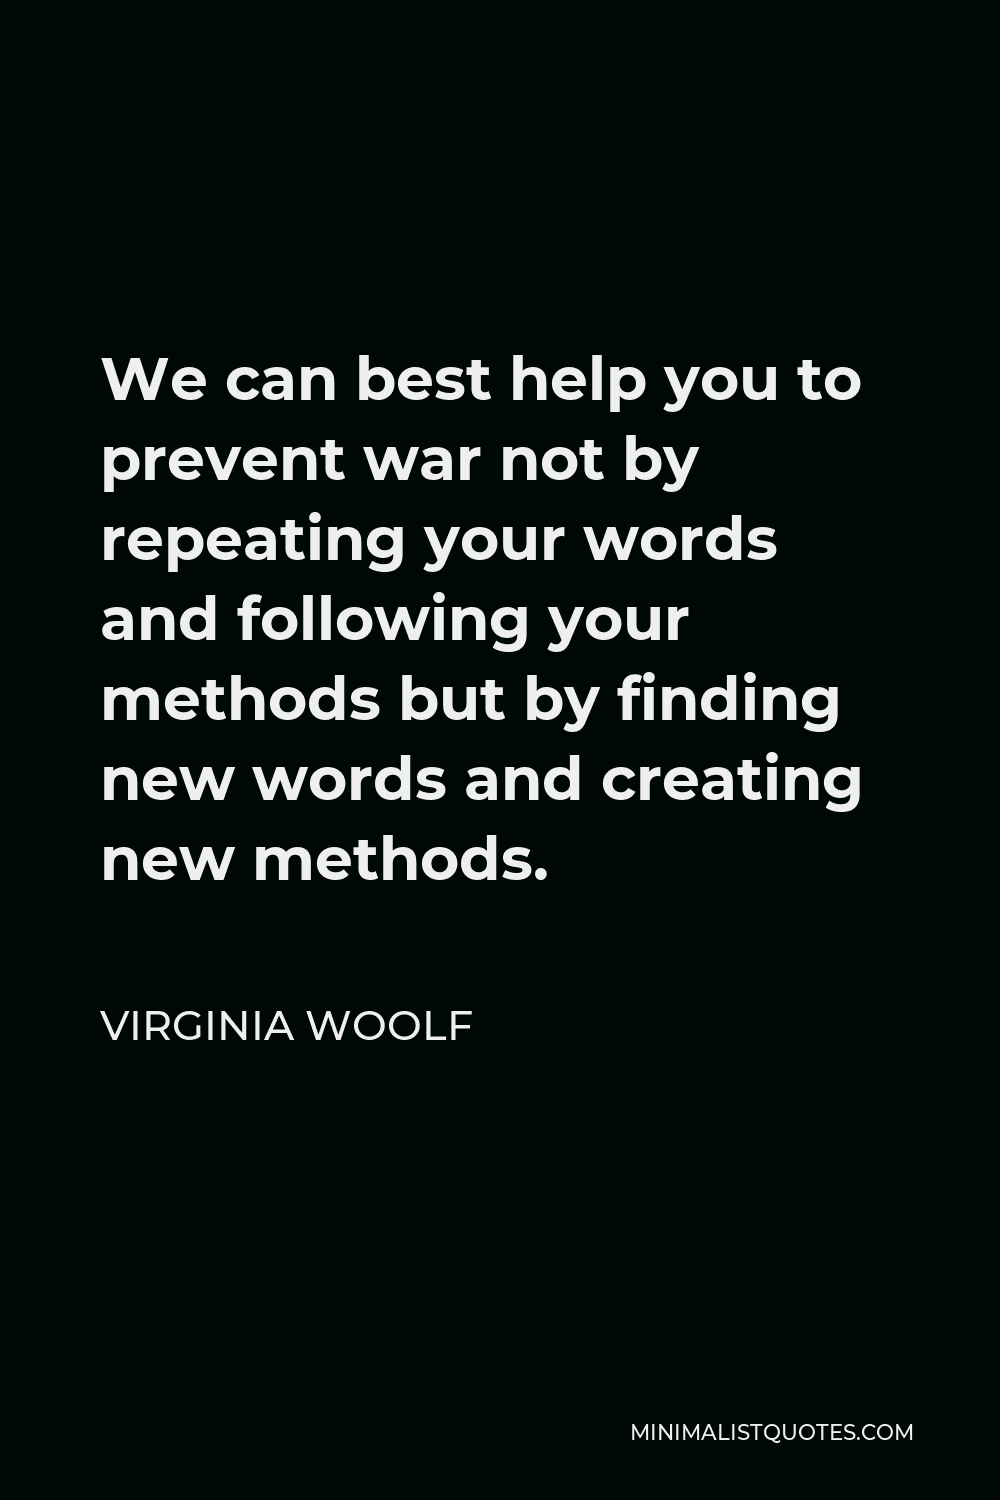 Virginia Woolf Quote - We can best help you to prevent war not by repeating your words and following your methods but by finding new words and creating new methods.